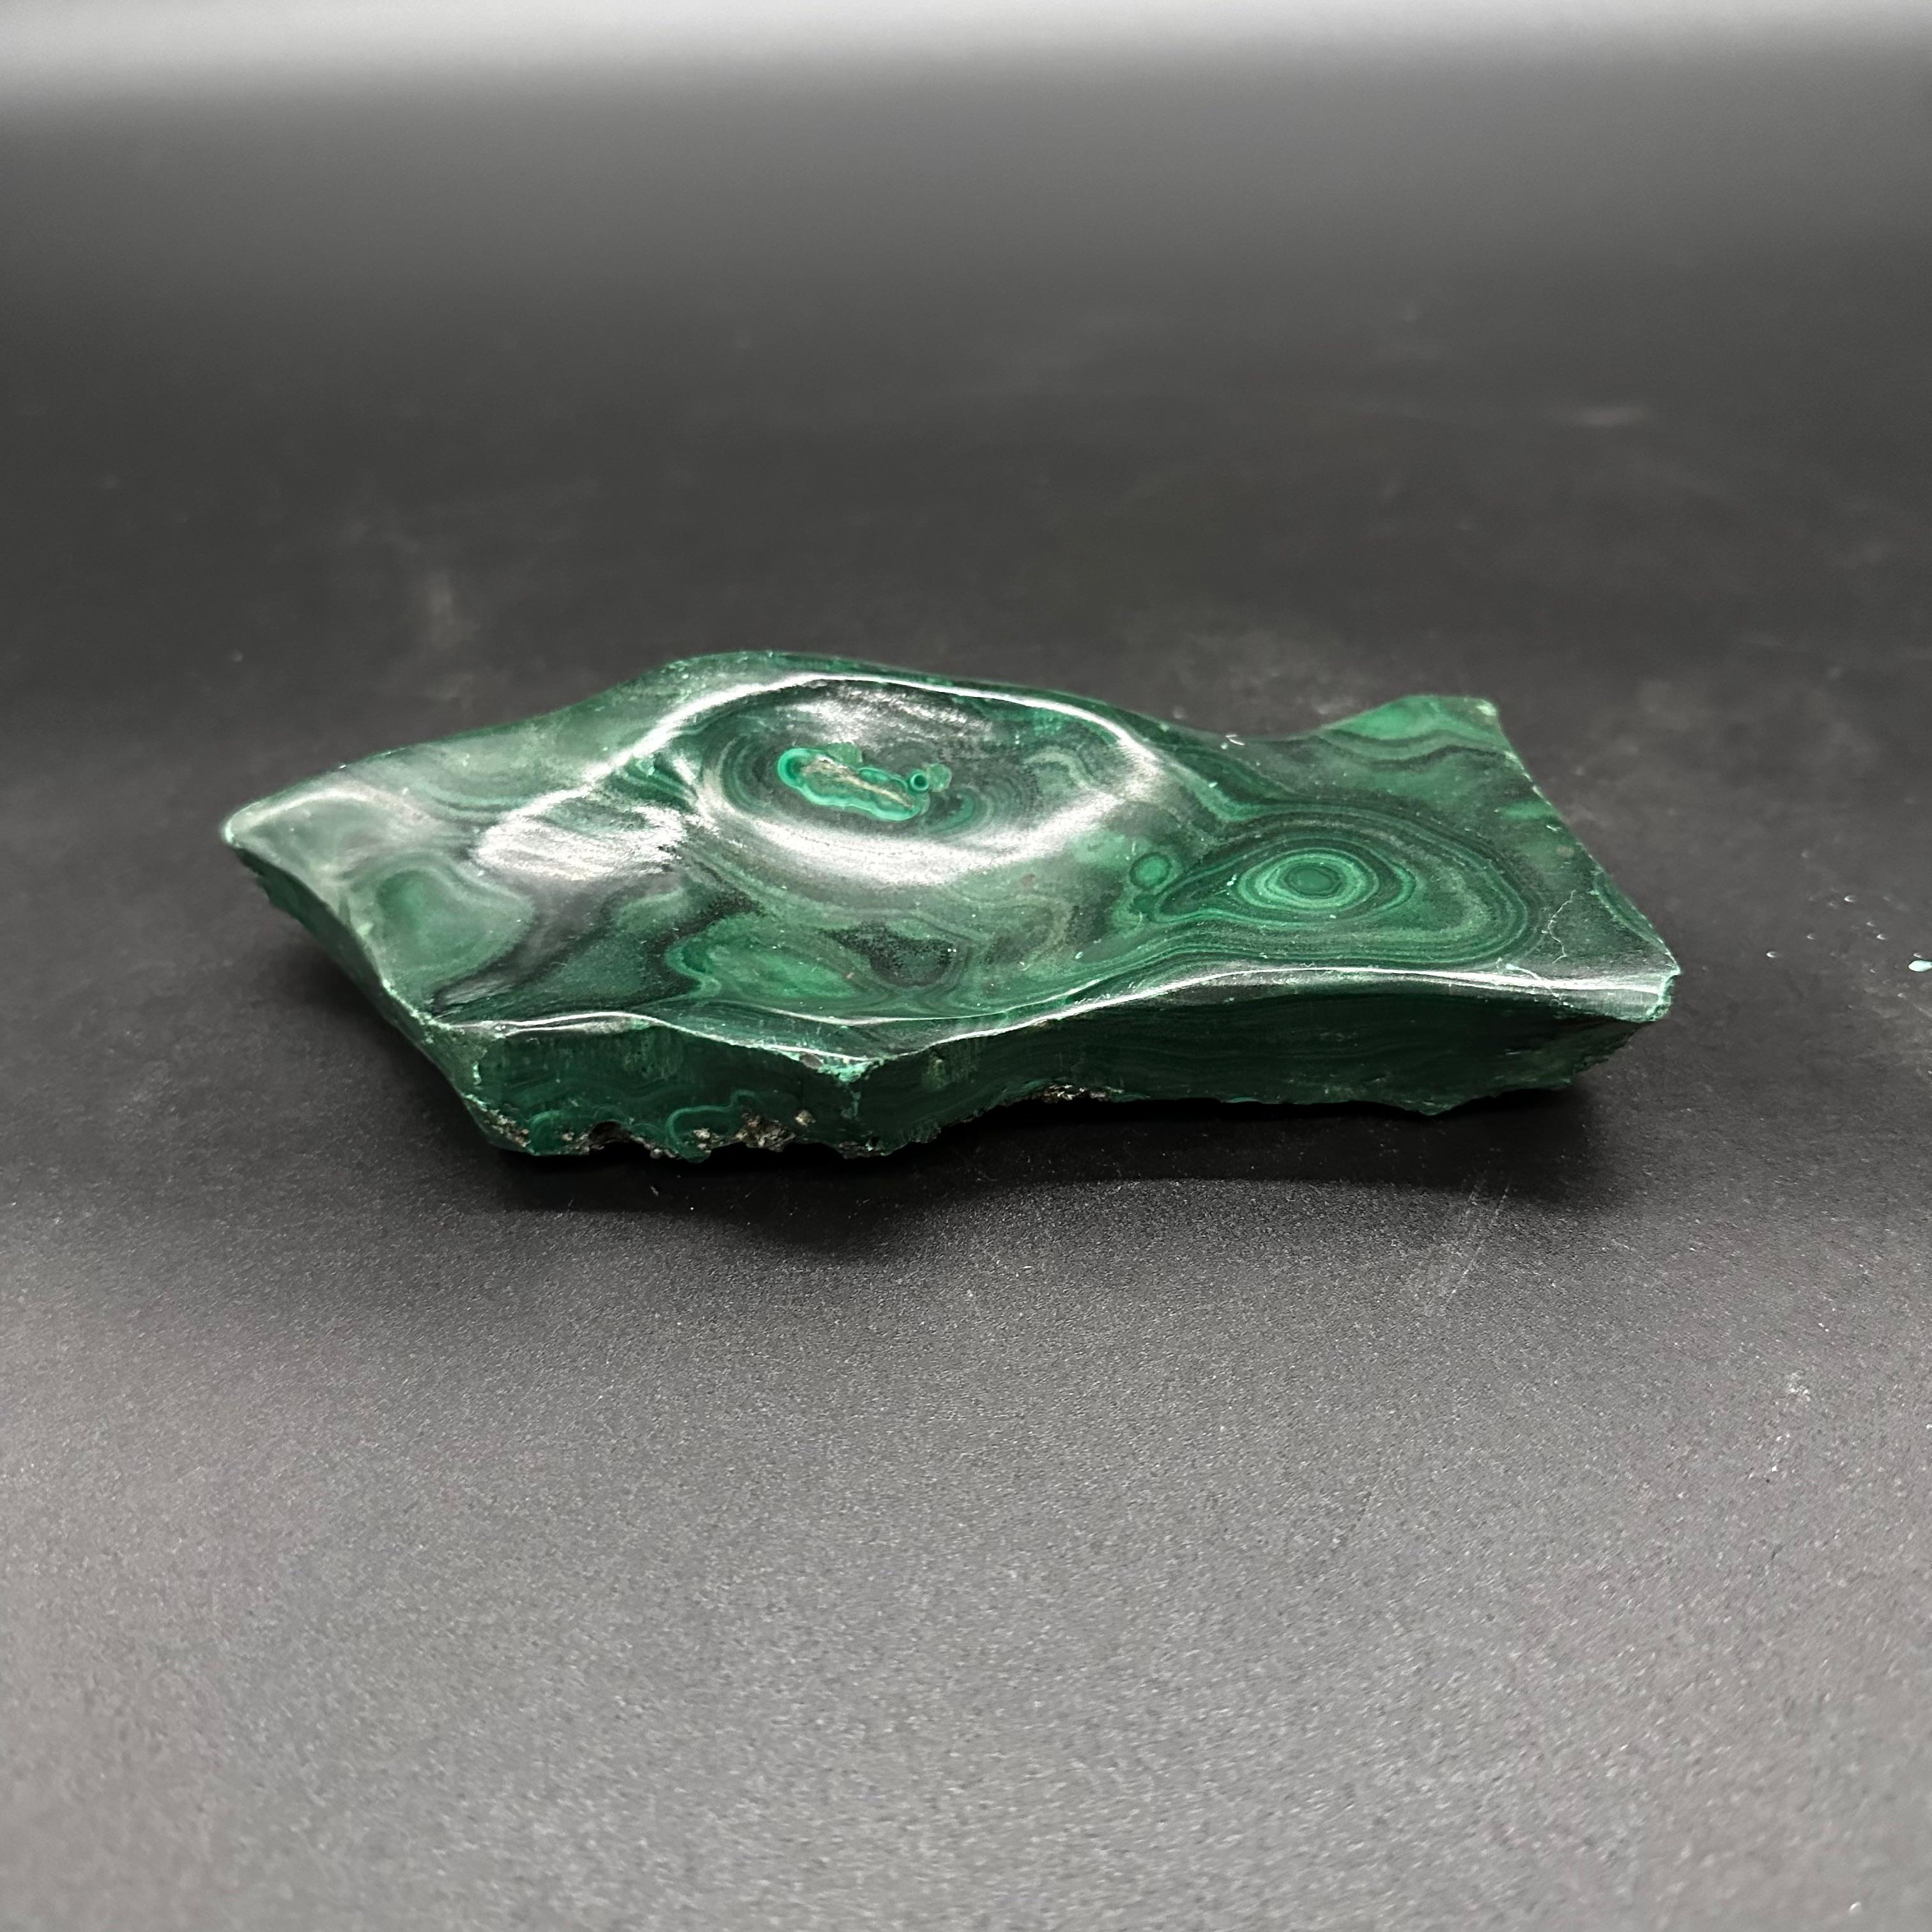 A vintage Italian Malachite ashtray from the 1960s is a small, elegant dish crafted from malachite stone in Italy during the 1960s, typically featuring rich green hues and a sleek design characteristic of the era.

